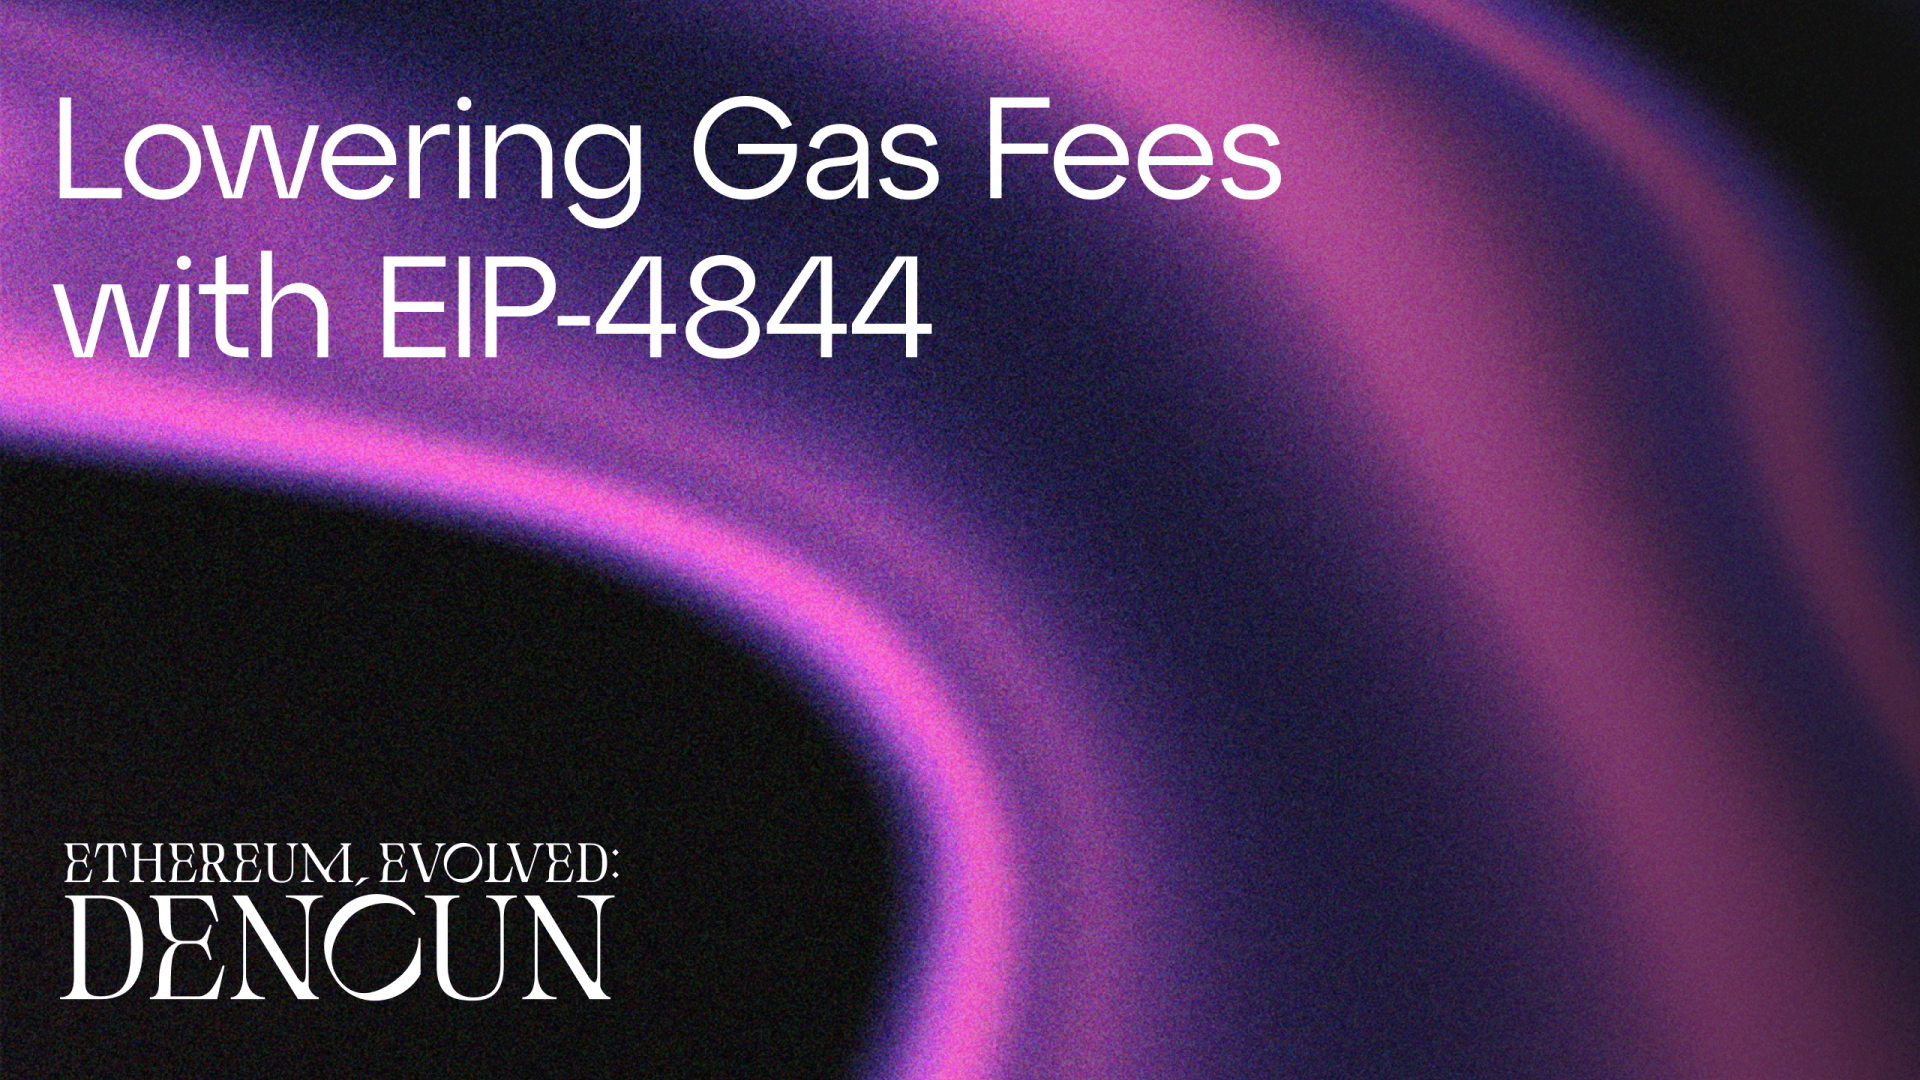 Lowering Gas Fees with EIP-4844